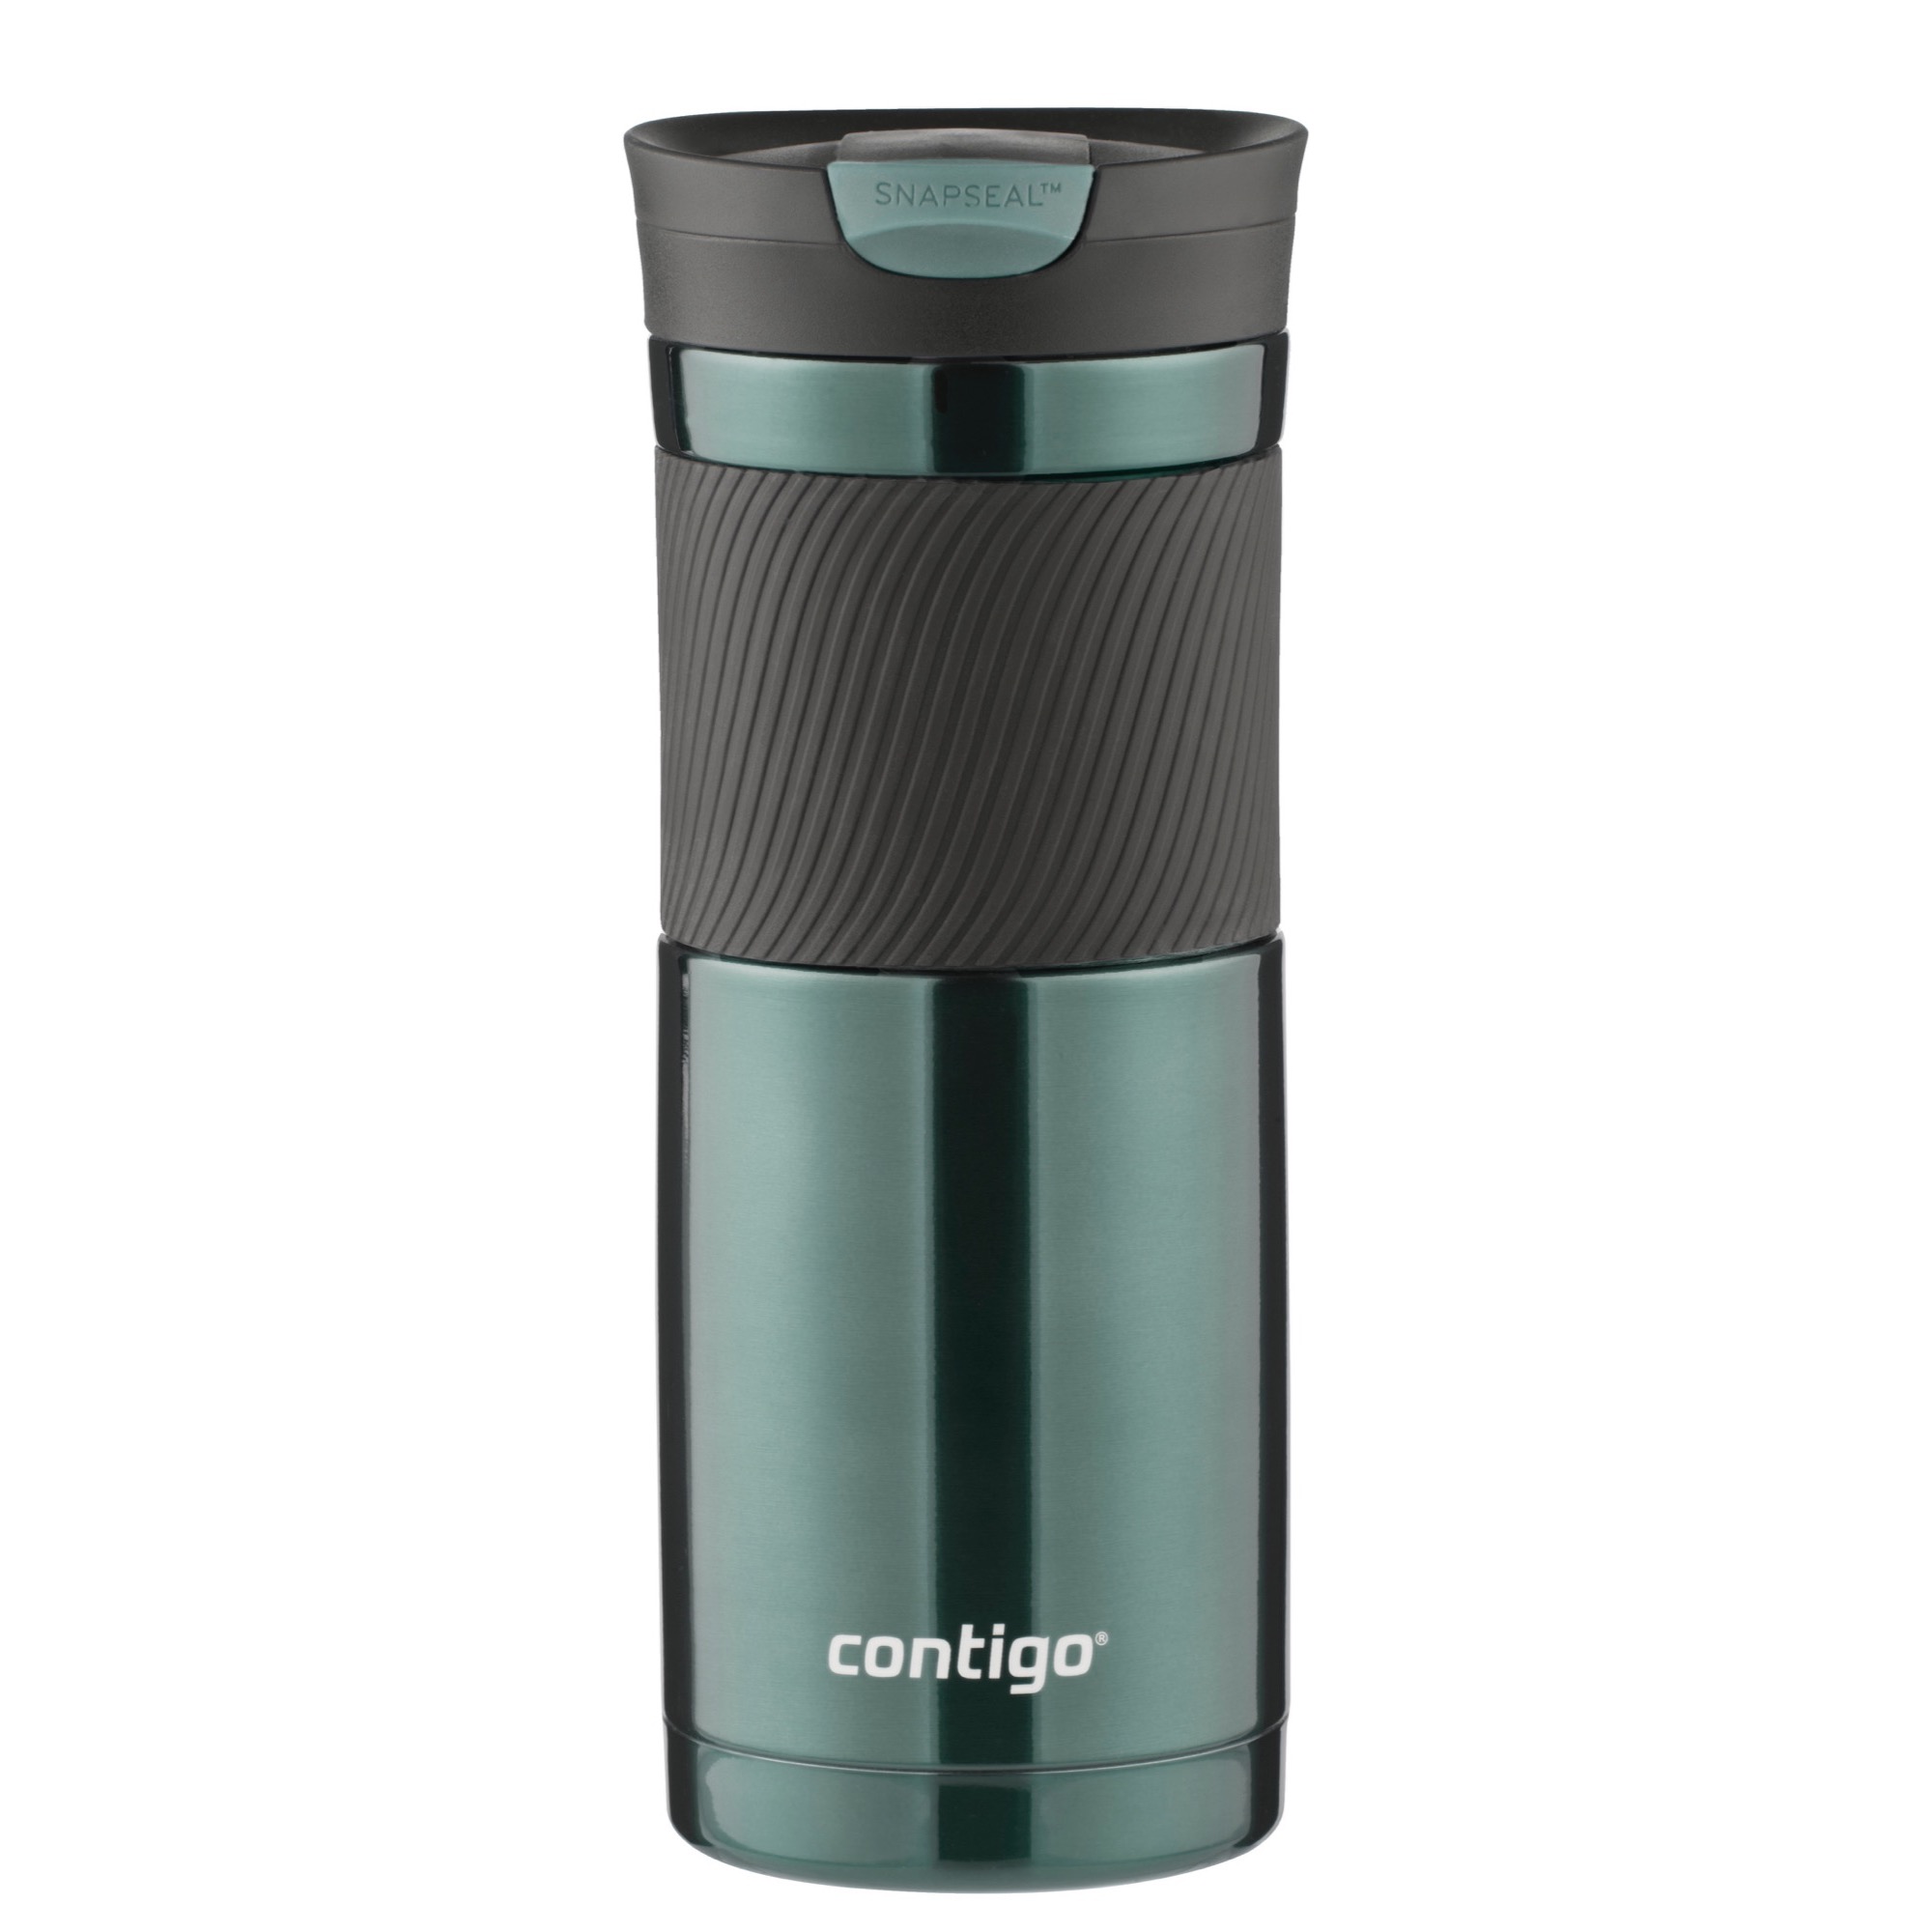 Contigo Byron Stainless Steel Travel Mug with SNAPSEAL Lid and Grip Grayed Jade, 20 fl oz. - image 1 of 5